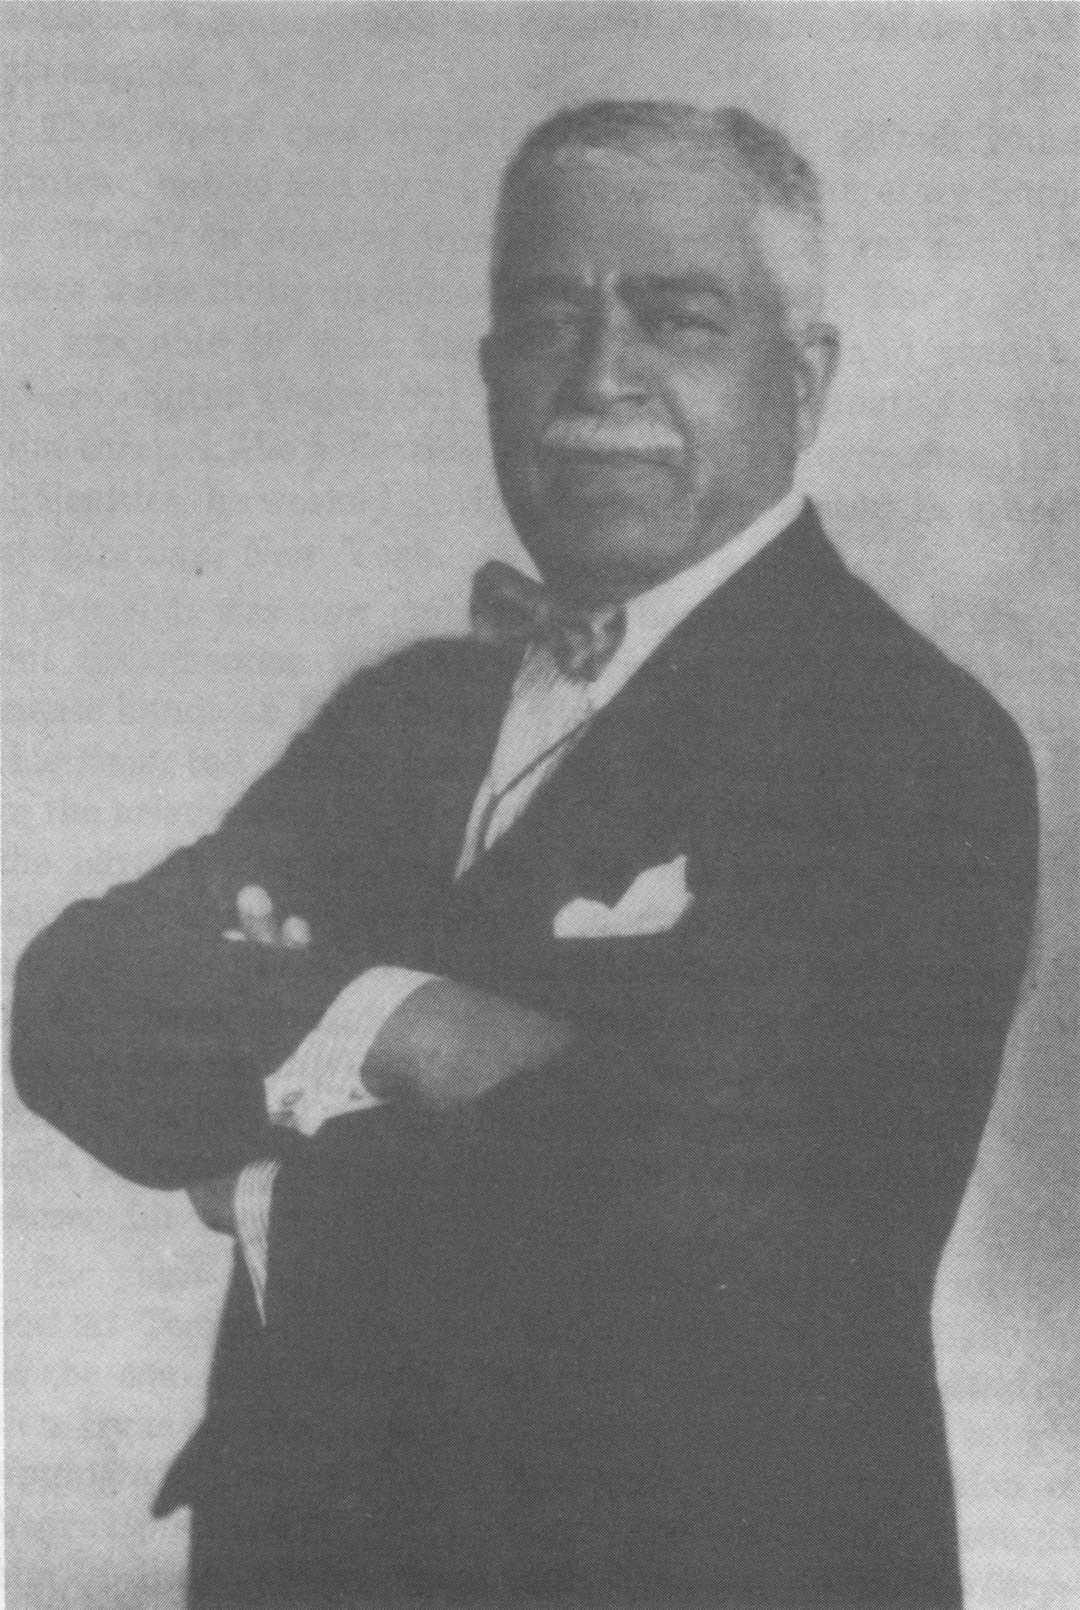 Photograph of Harry T. Burleigh in a suit, standing, arms crossed.